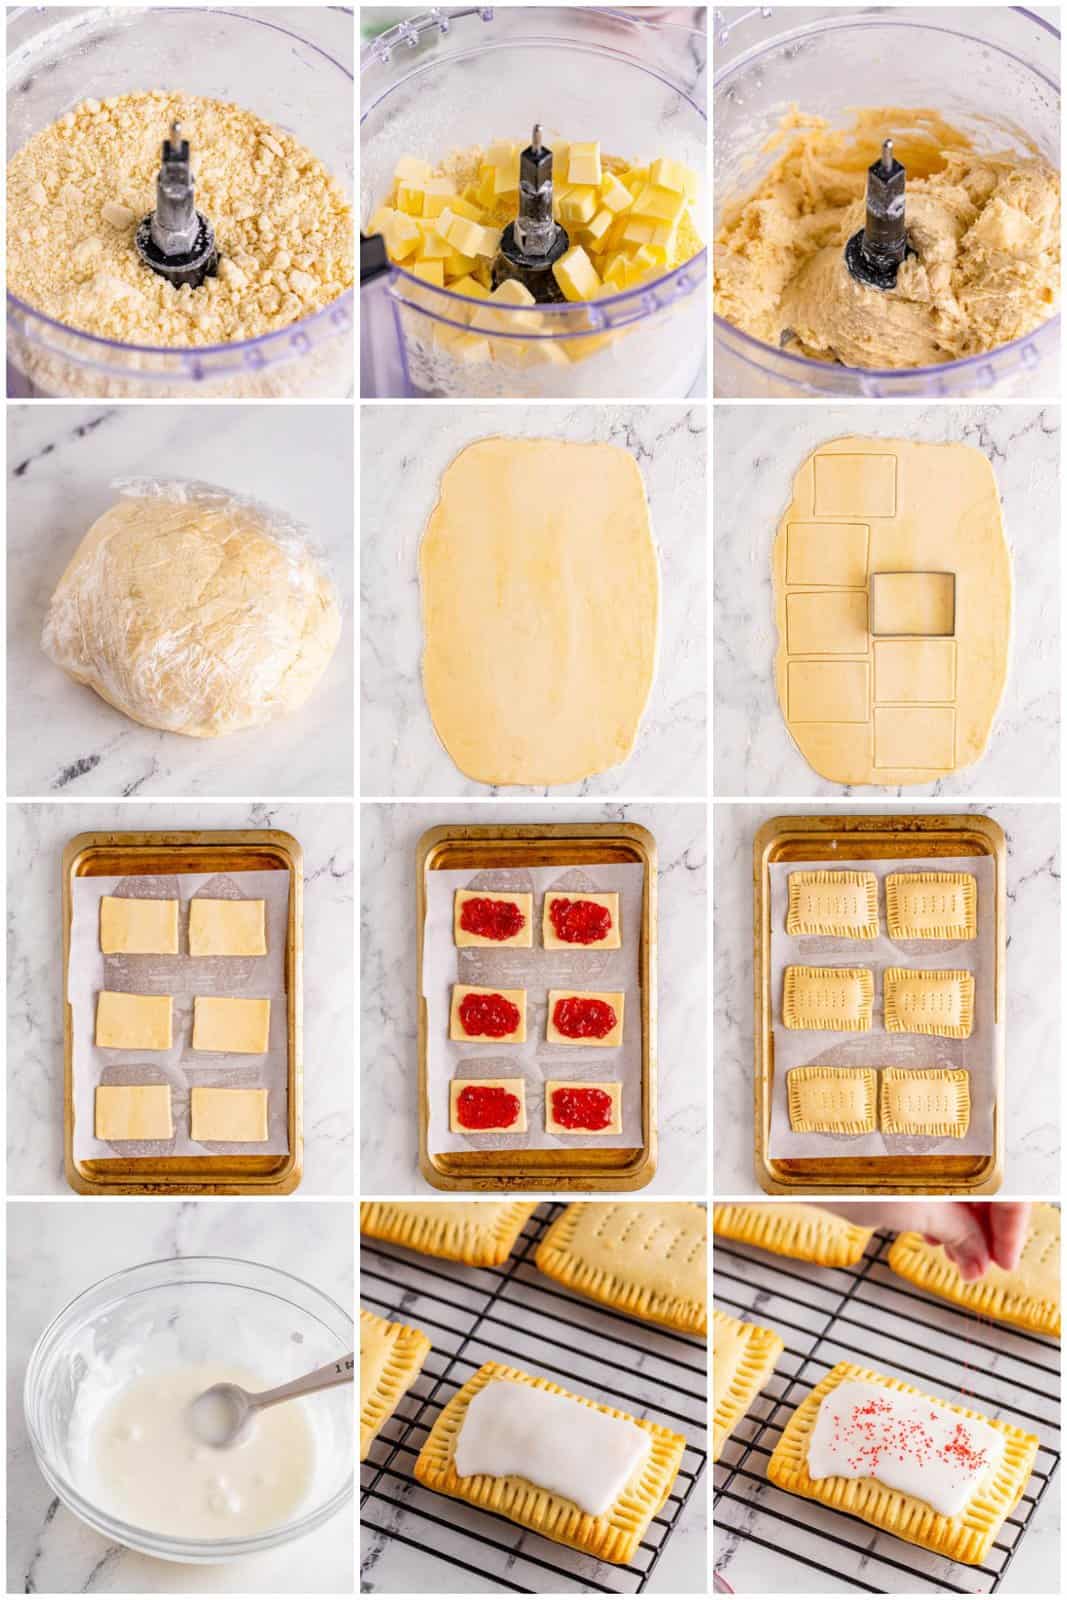 Step by step photos on how to make Homemade Strawberry Pop-Tarts.